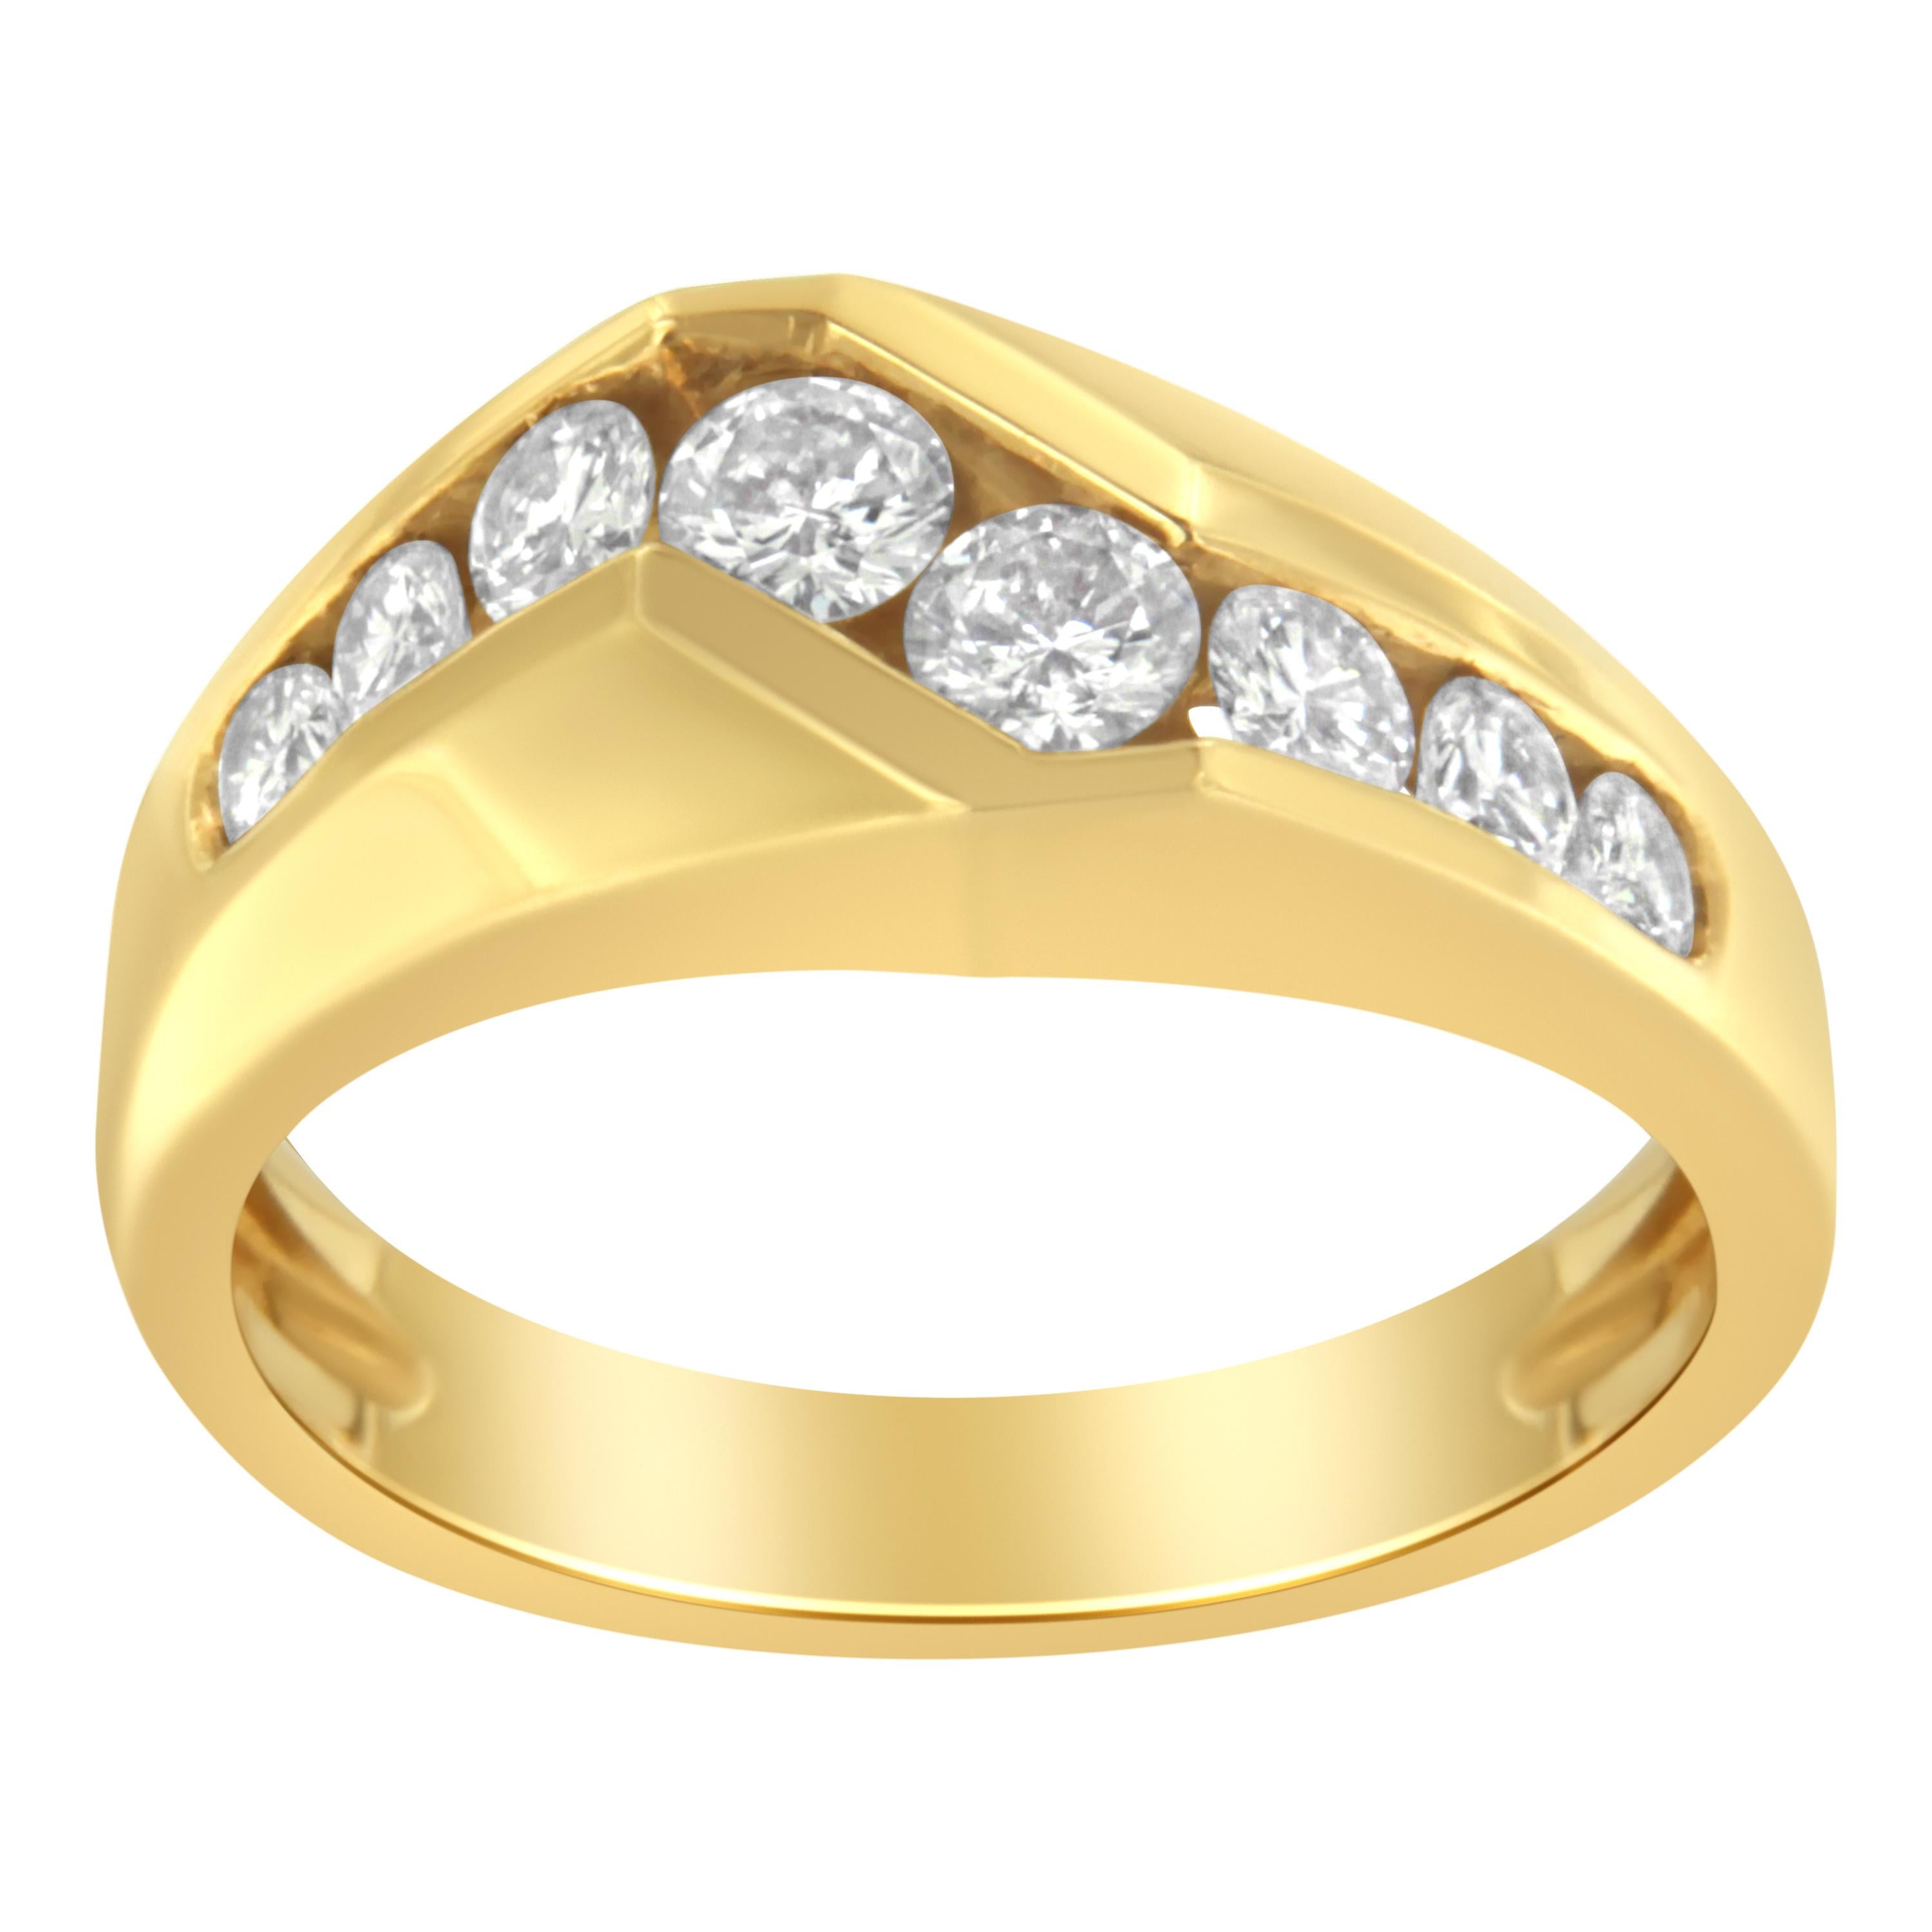 A diamond men's band that is uniquely designed with eight graduated round diamonds set in a Z-form shape along a wide 14 karat yellow gold band. The elegant design has a total diamond weight of 1 carat. 'Video Available Upon Request'

Product